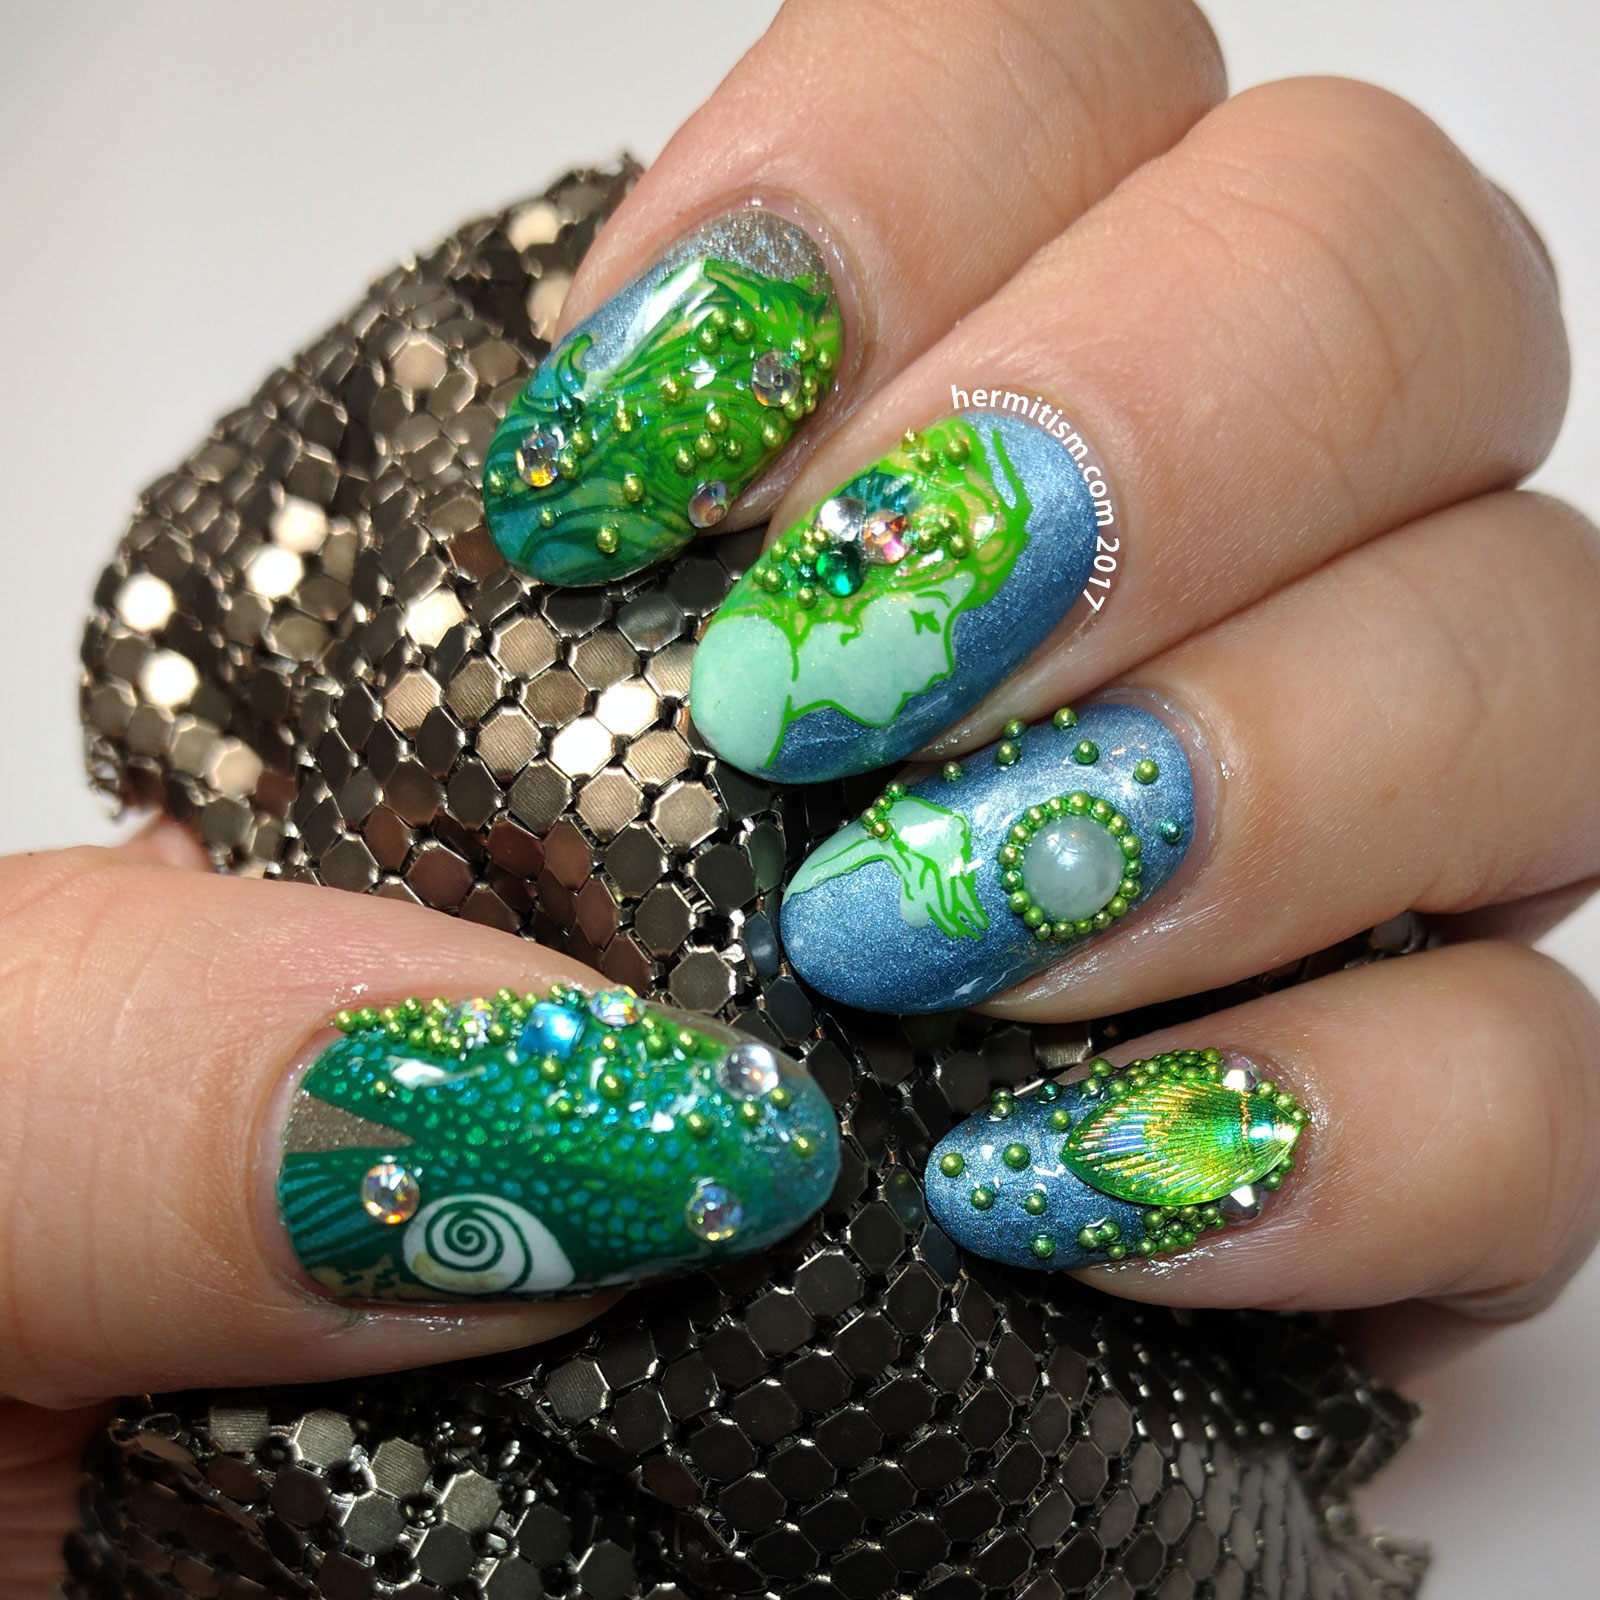 Mermaid's Treasure - 30 Days of Color - Hermit Werds - a bling mermaid mani with pearls and caviar beads.